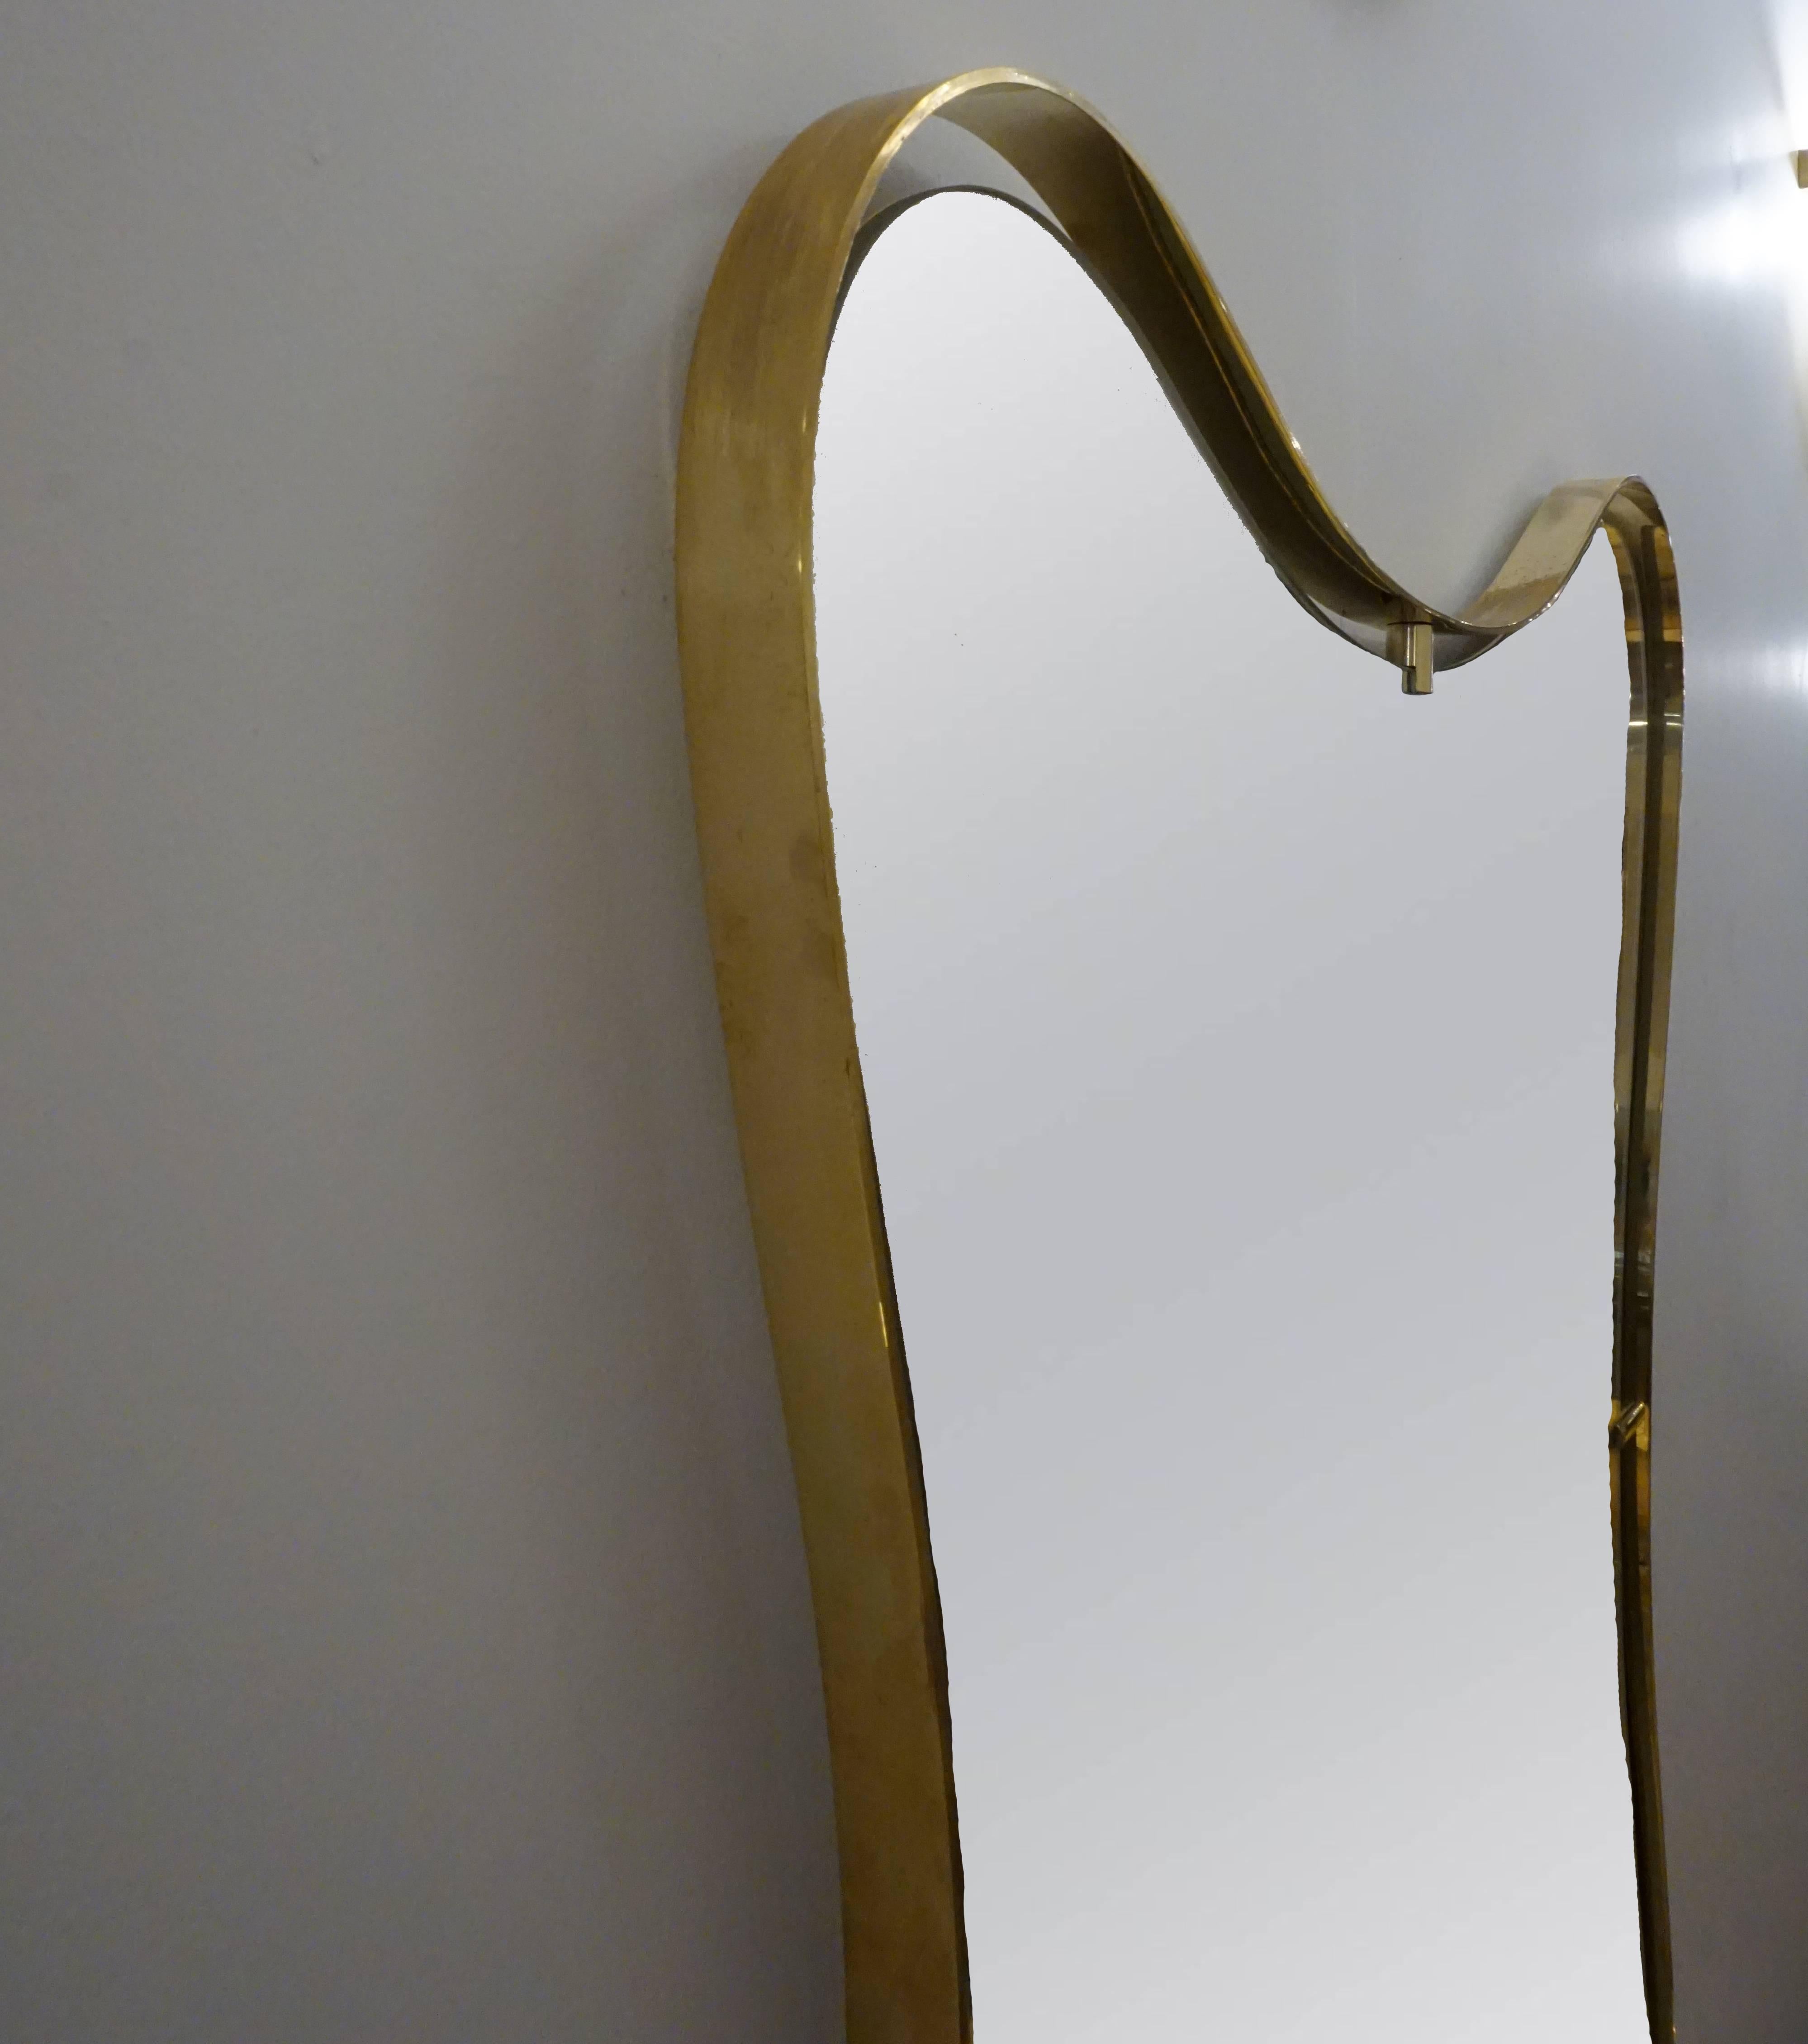 Organic Modern Contemporary Italian Minimalist Brass Mirror with Organic Curved Frame For Sale